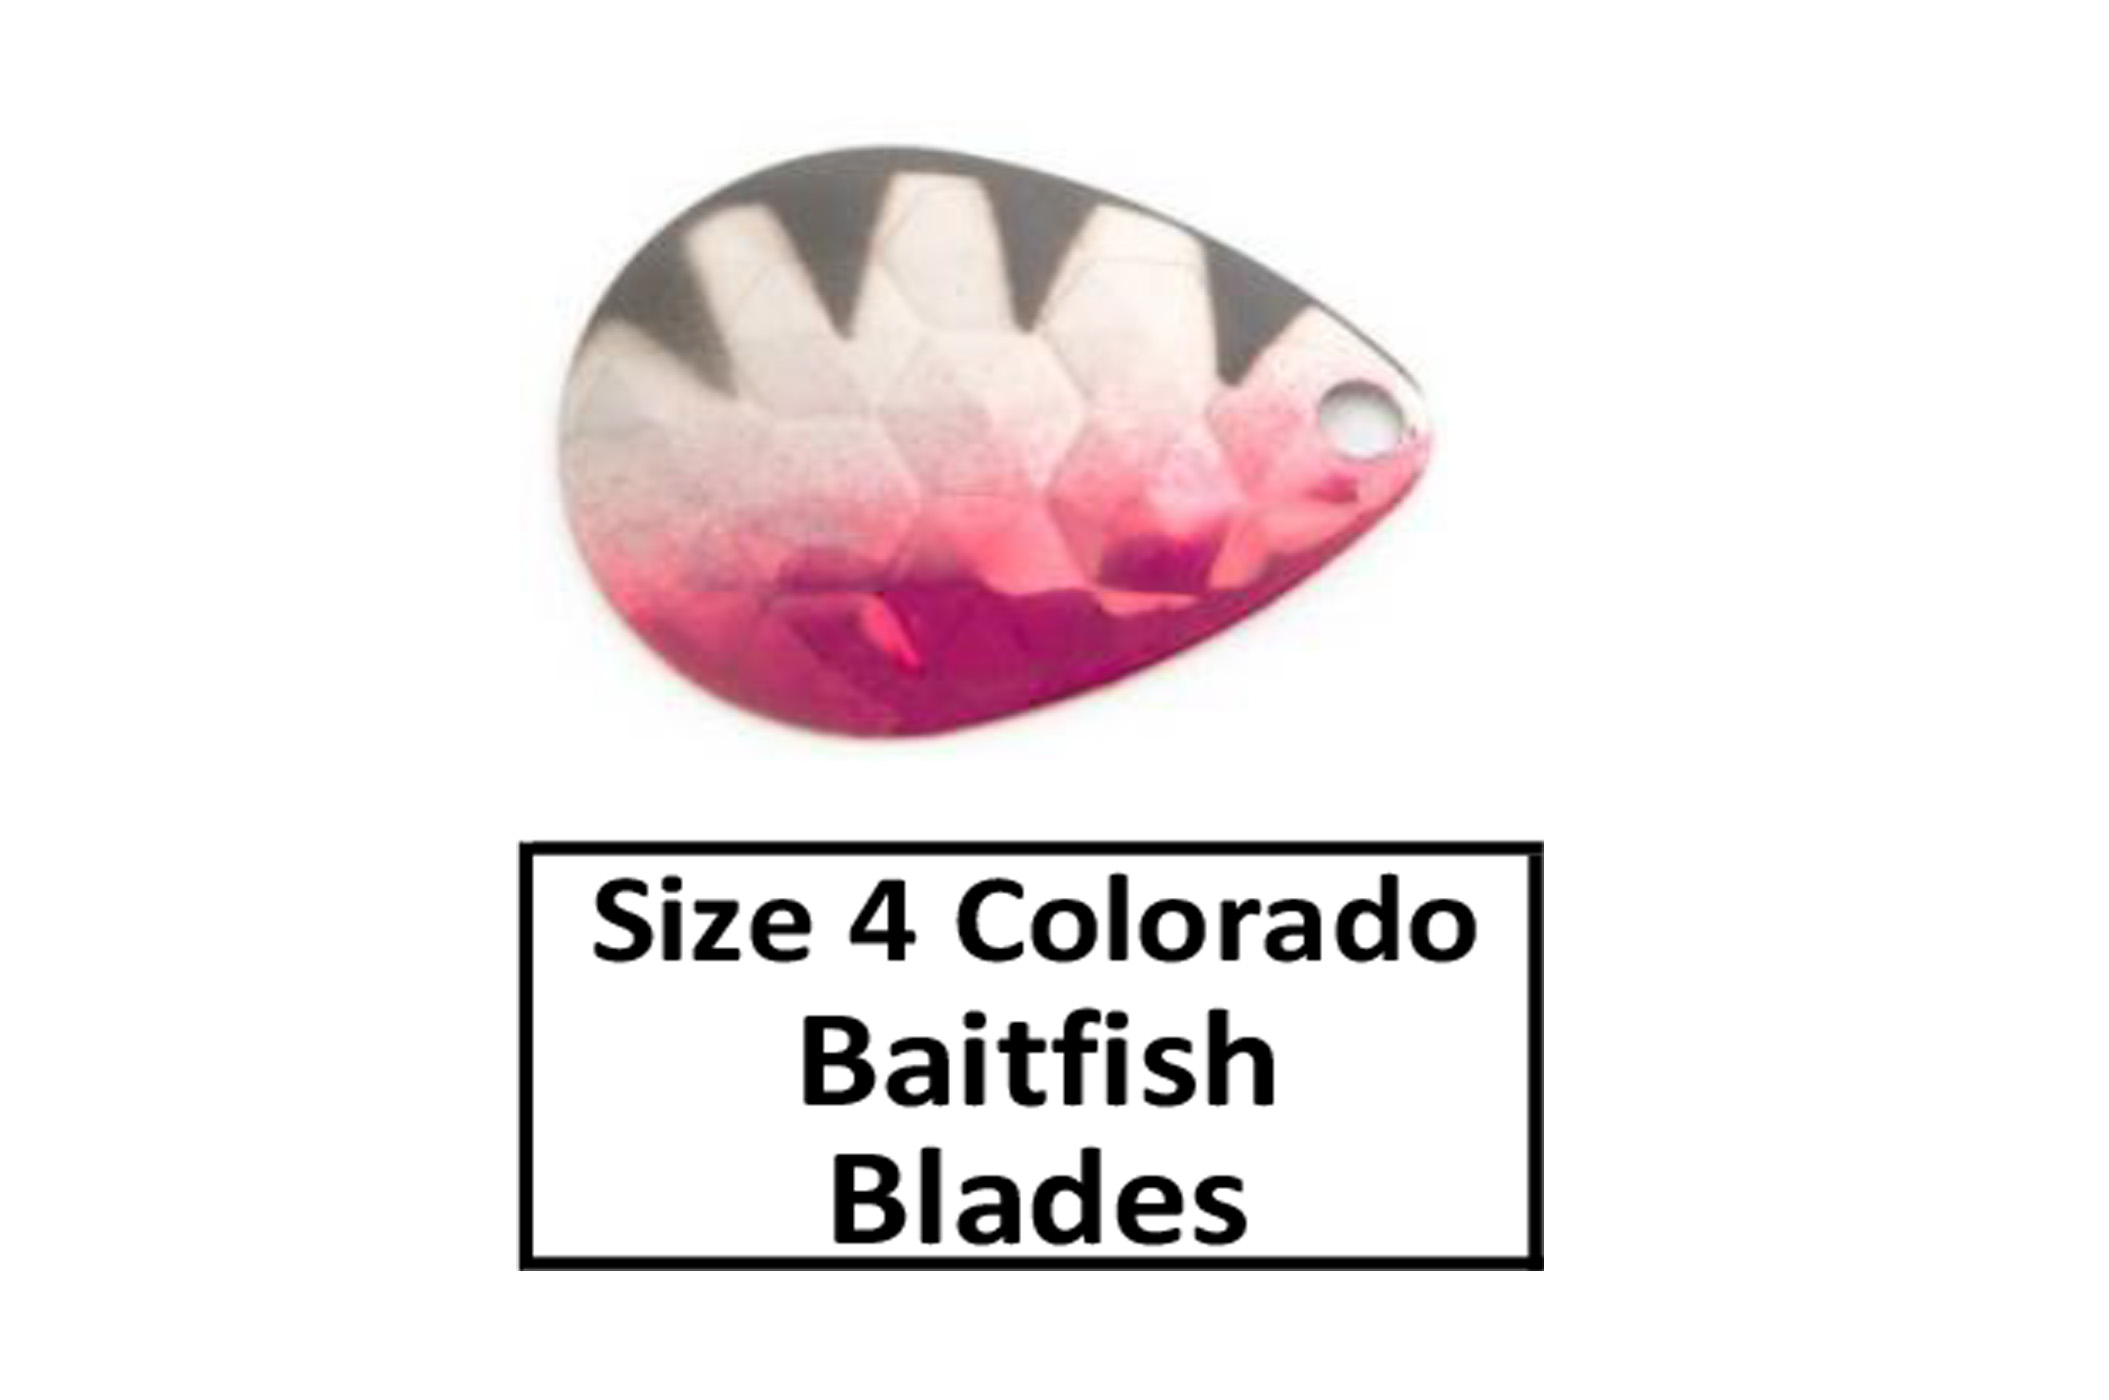 Size 4 Colorado Multi Dotted Spinner Blades - D&B Fishing